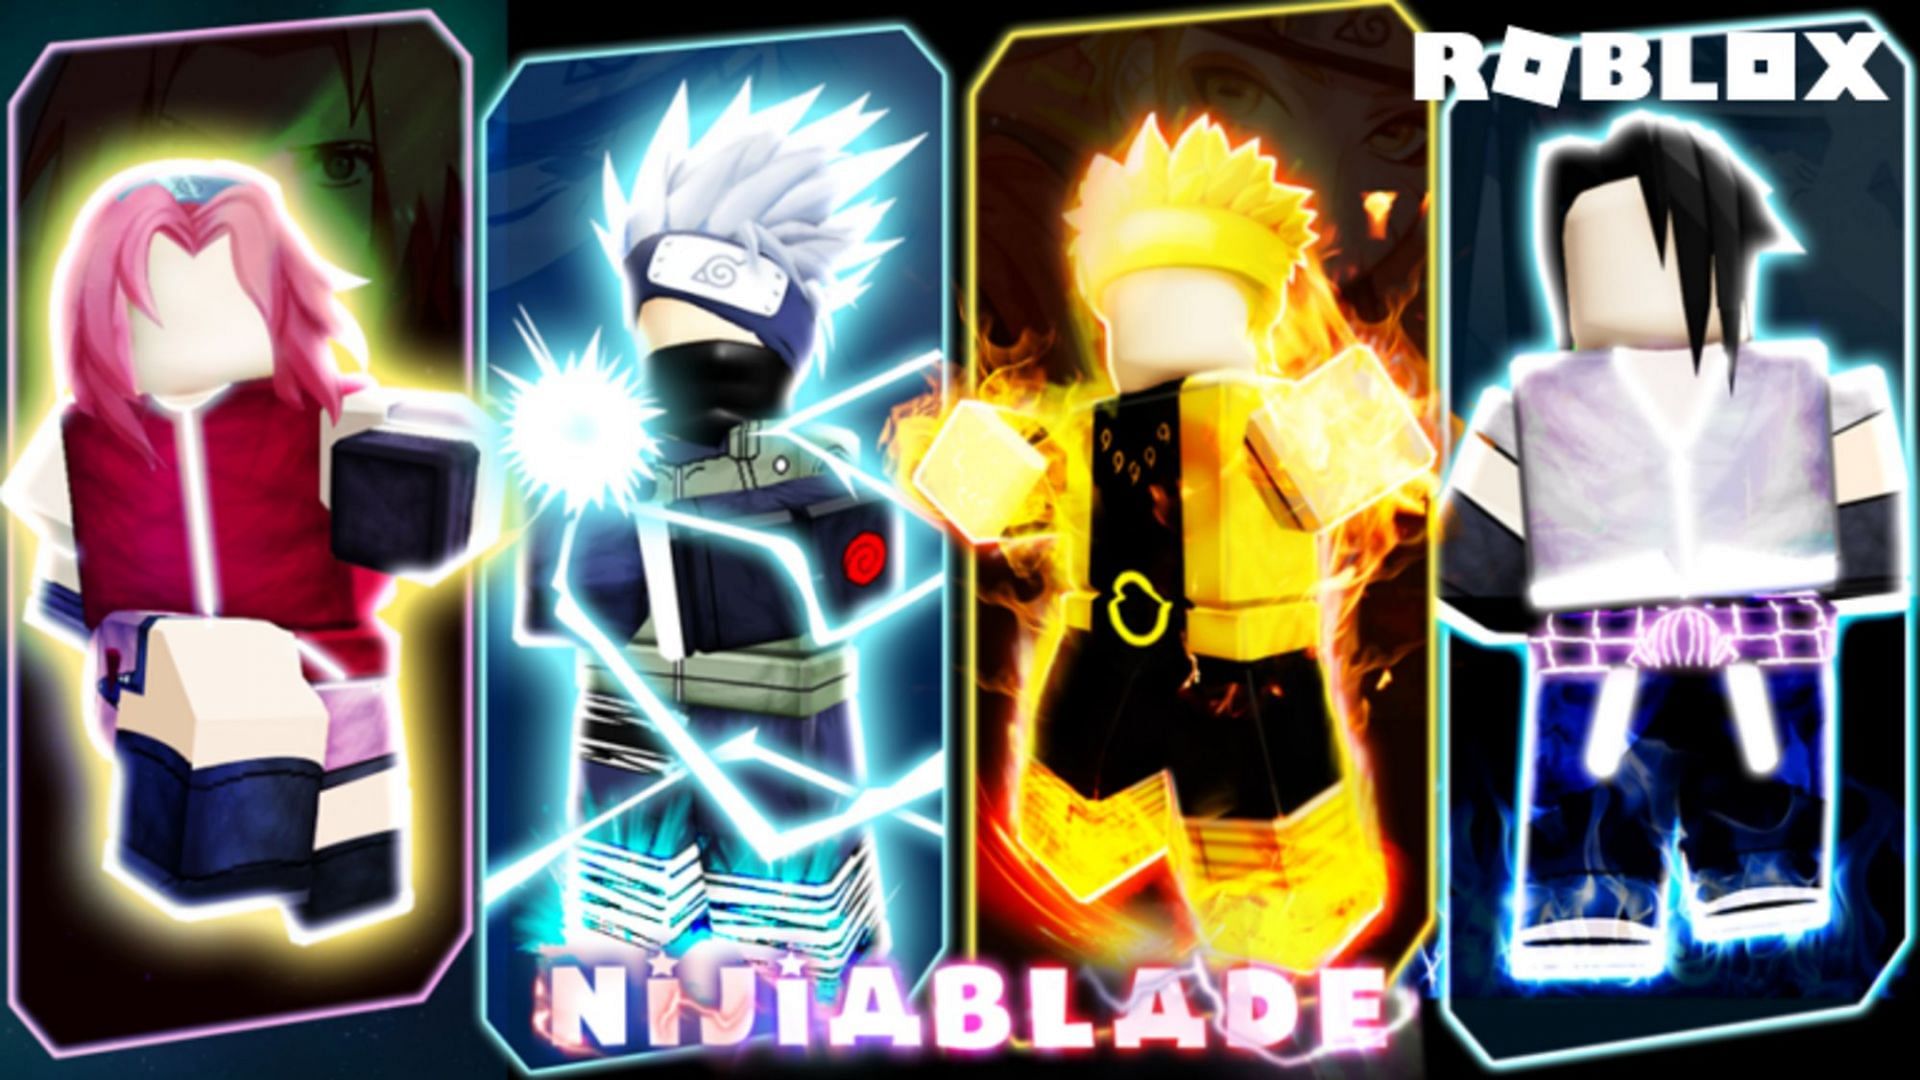 Codes to use for free diamonds and coins in Roblox Ninja Blade (Image via Roblox)